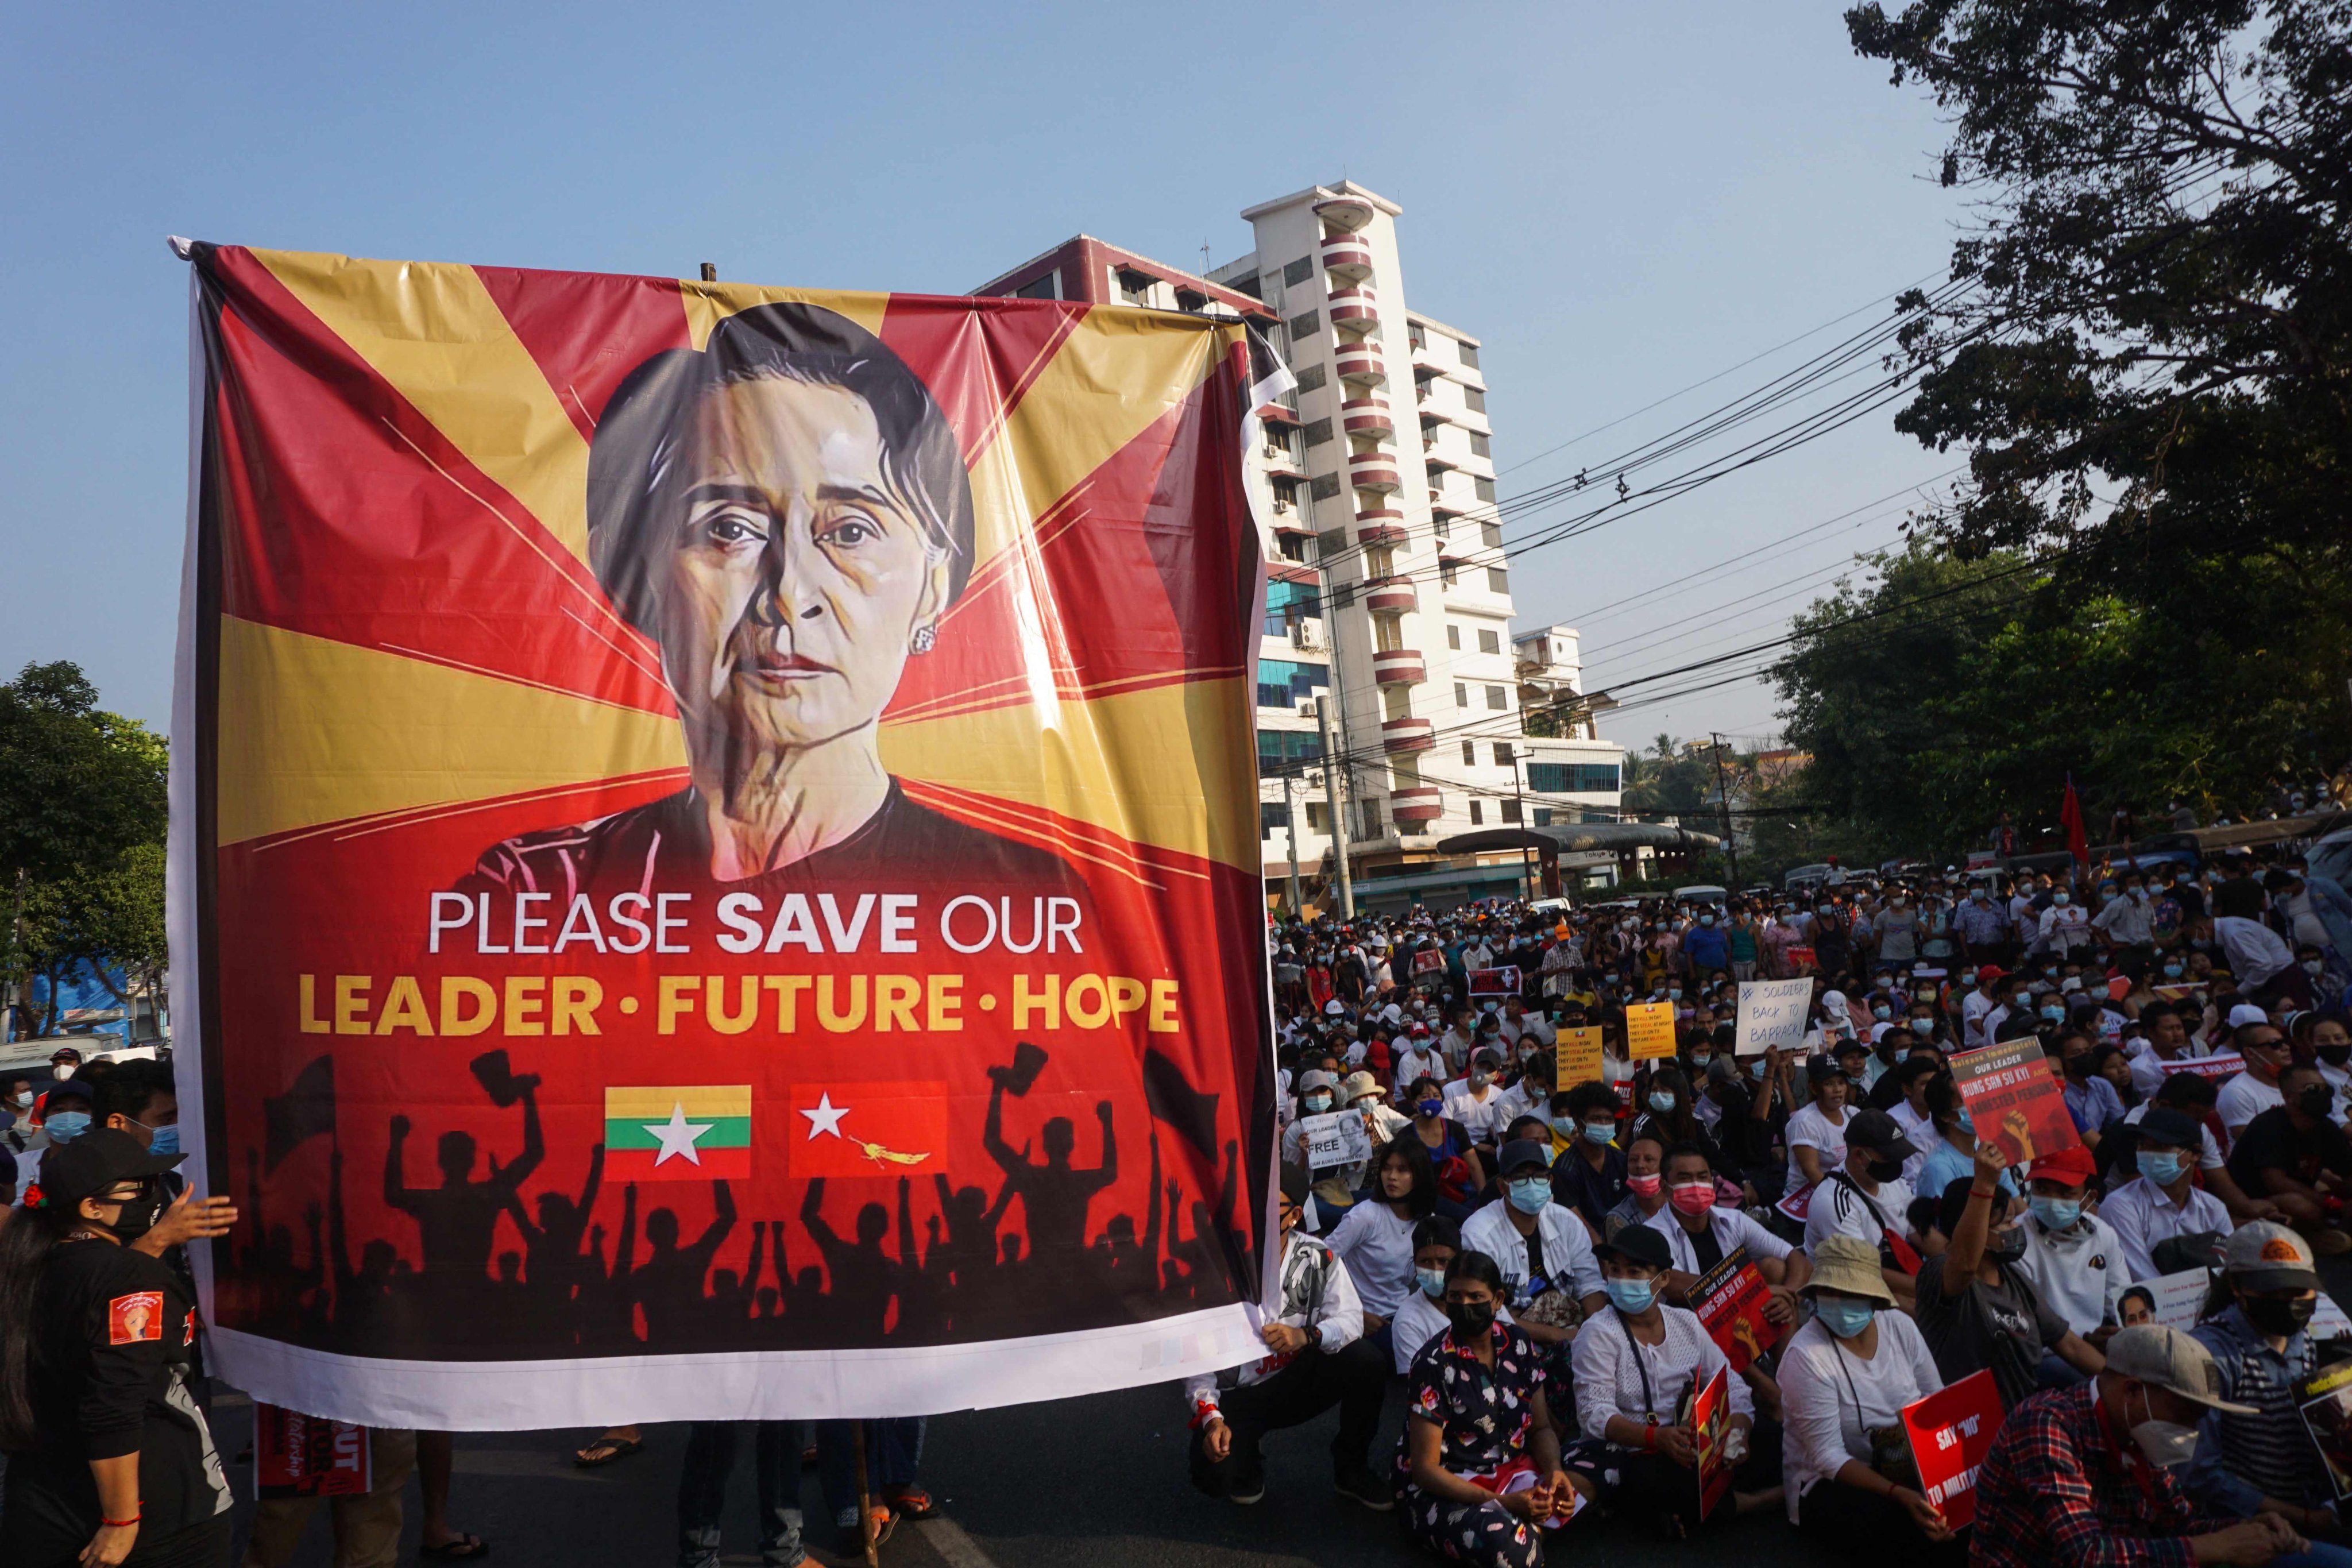 A banner featuring Aung San Suu Kyi is seen in February 2021 as protesters take part in a demonstration in Yangon against that month’s military coup. Photo: AFP